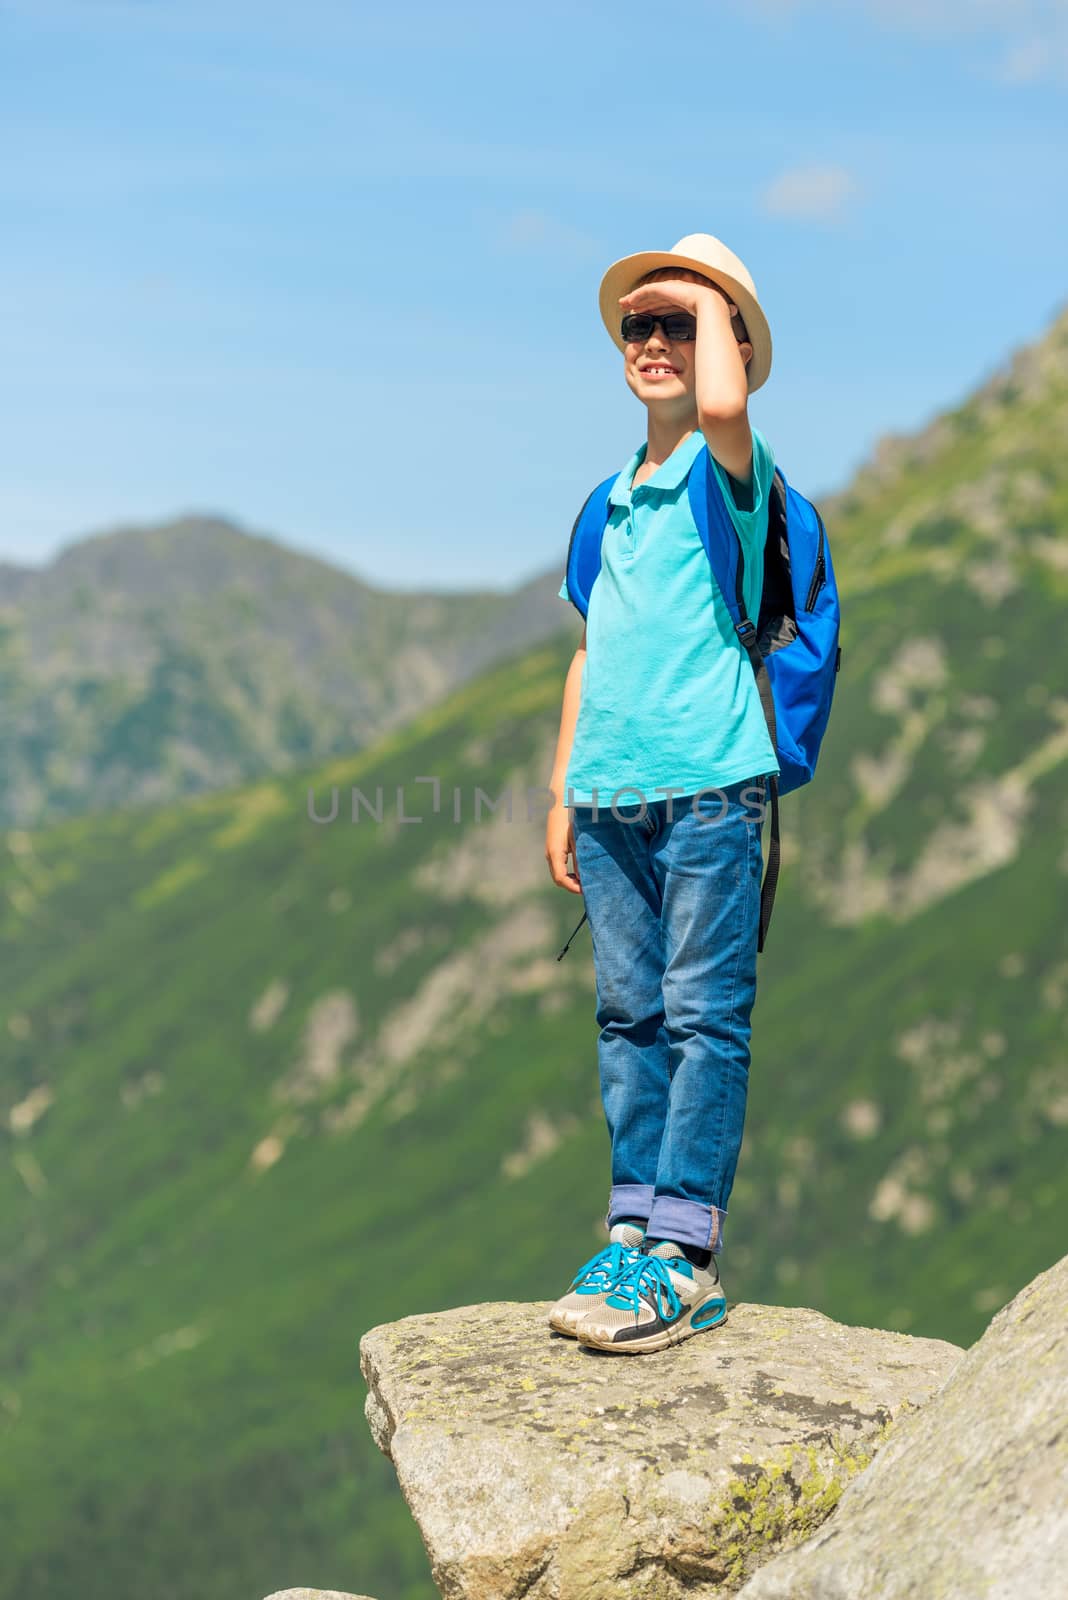 schoolboy traveler with a backpack high in the mountains on a rock